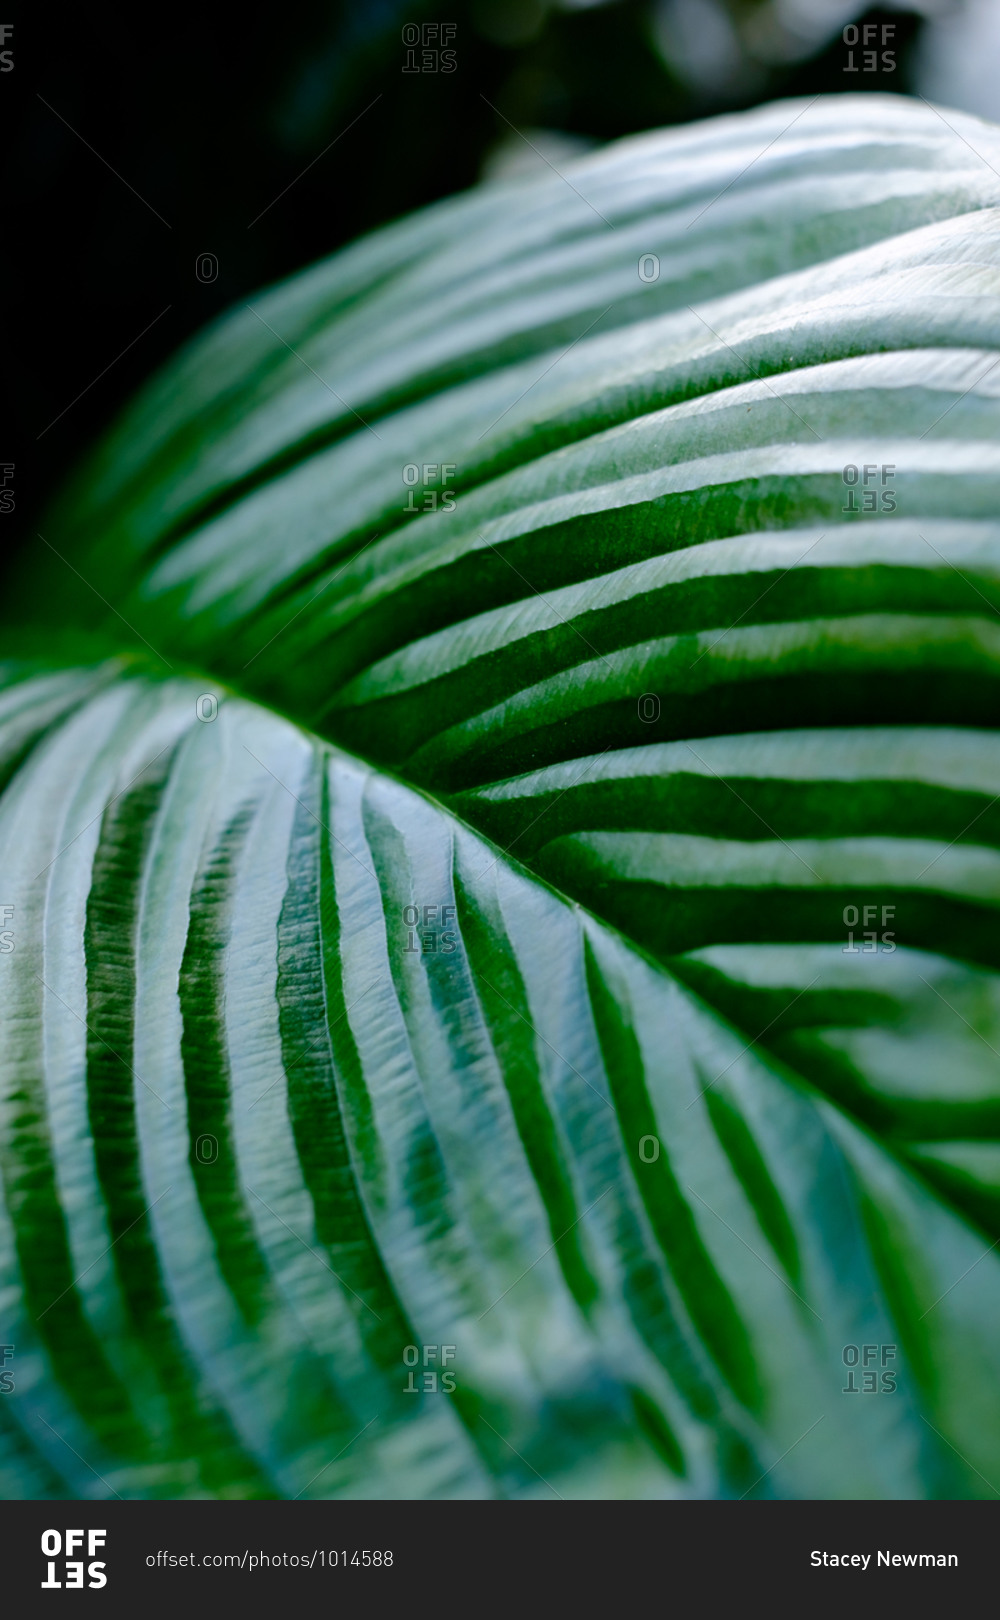 A green tropical leafy plant close up